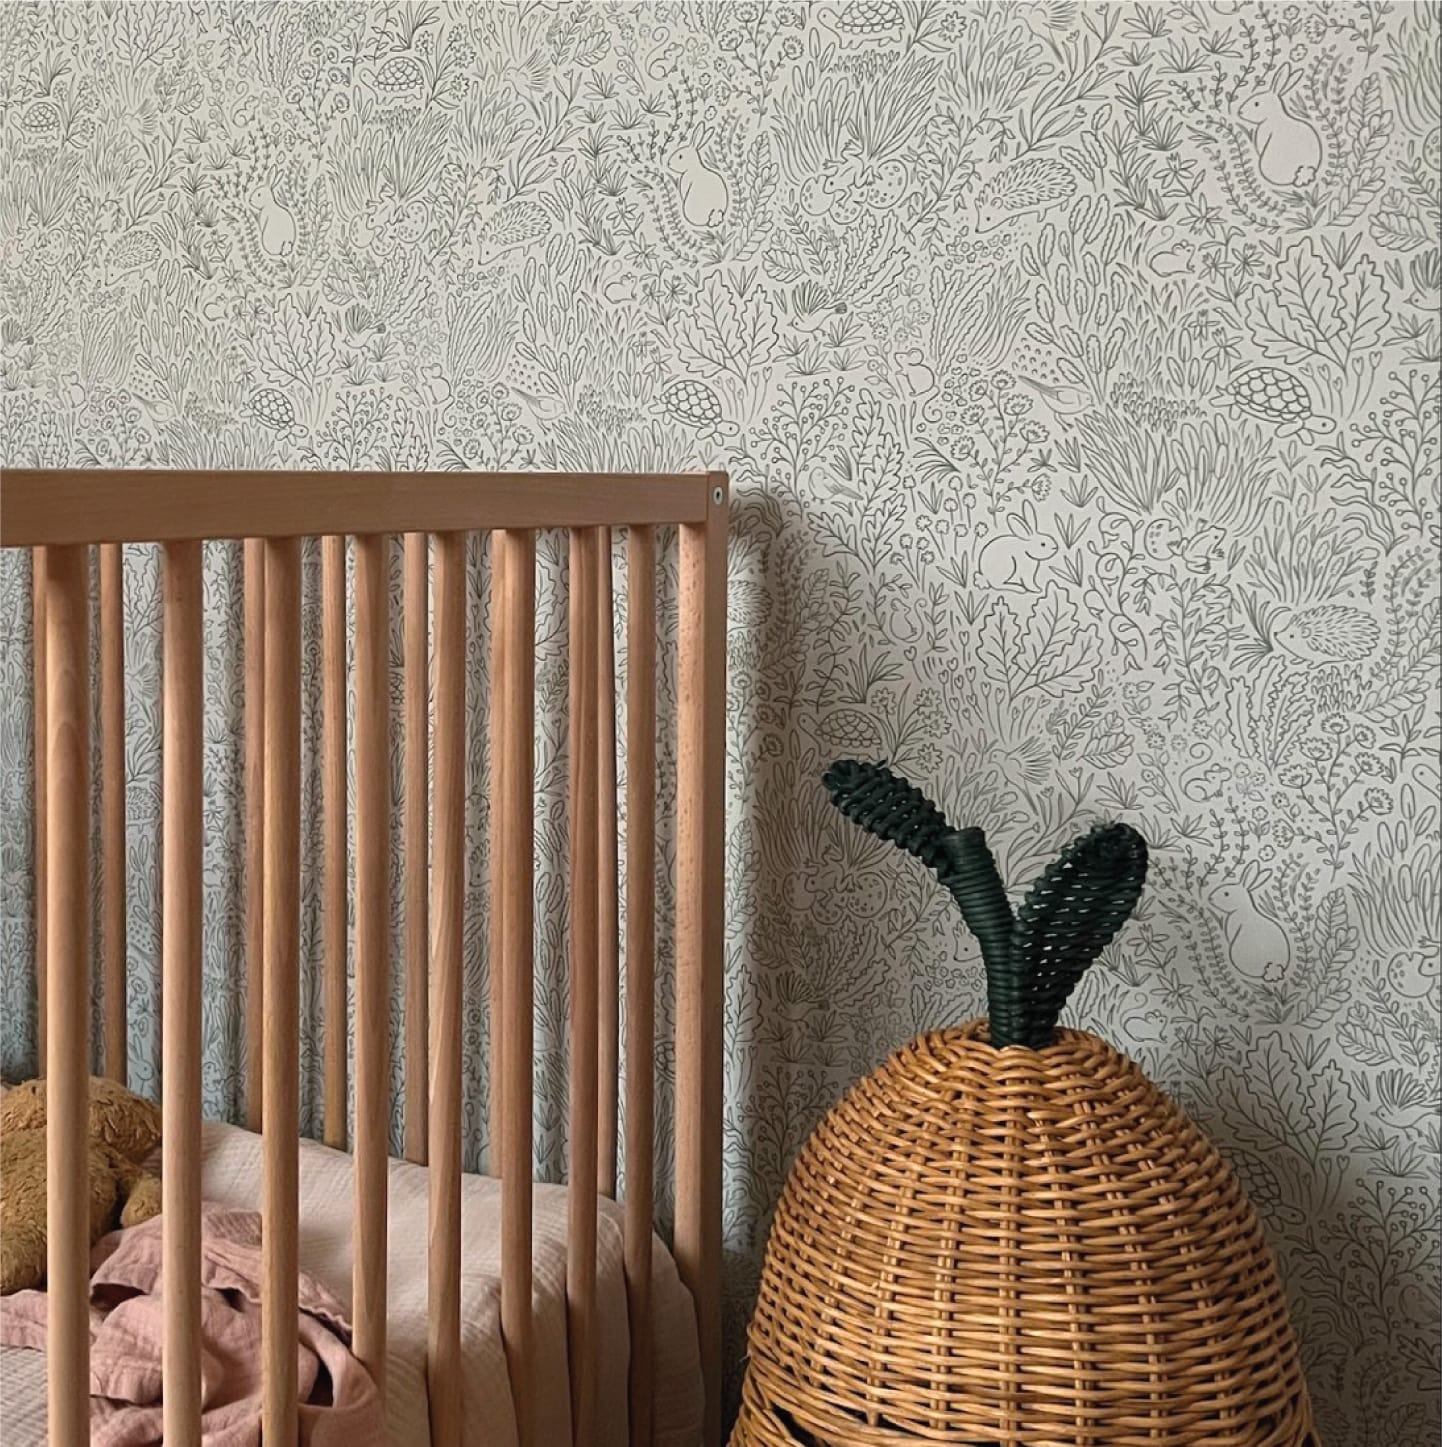 Corner of a natural wooden cot with peach bedding next to a ferm living pear basket in front of a wall with garden doodles sage wallpaper.